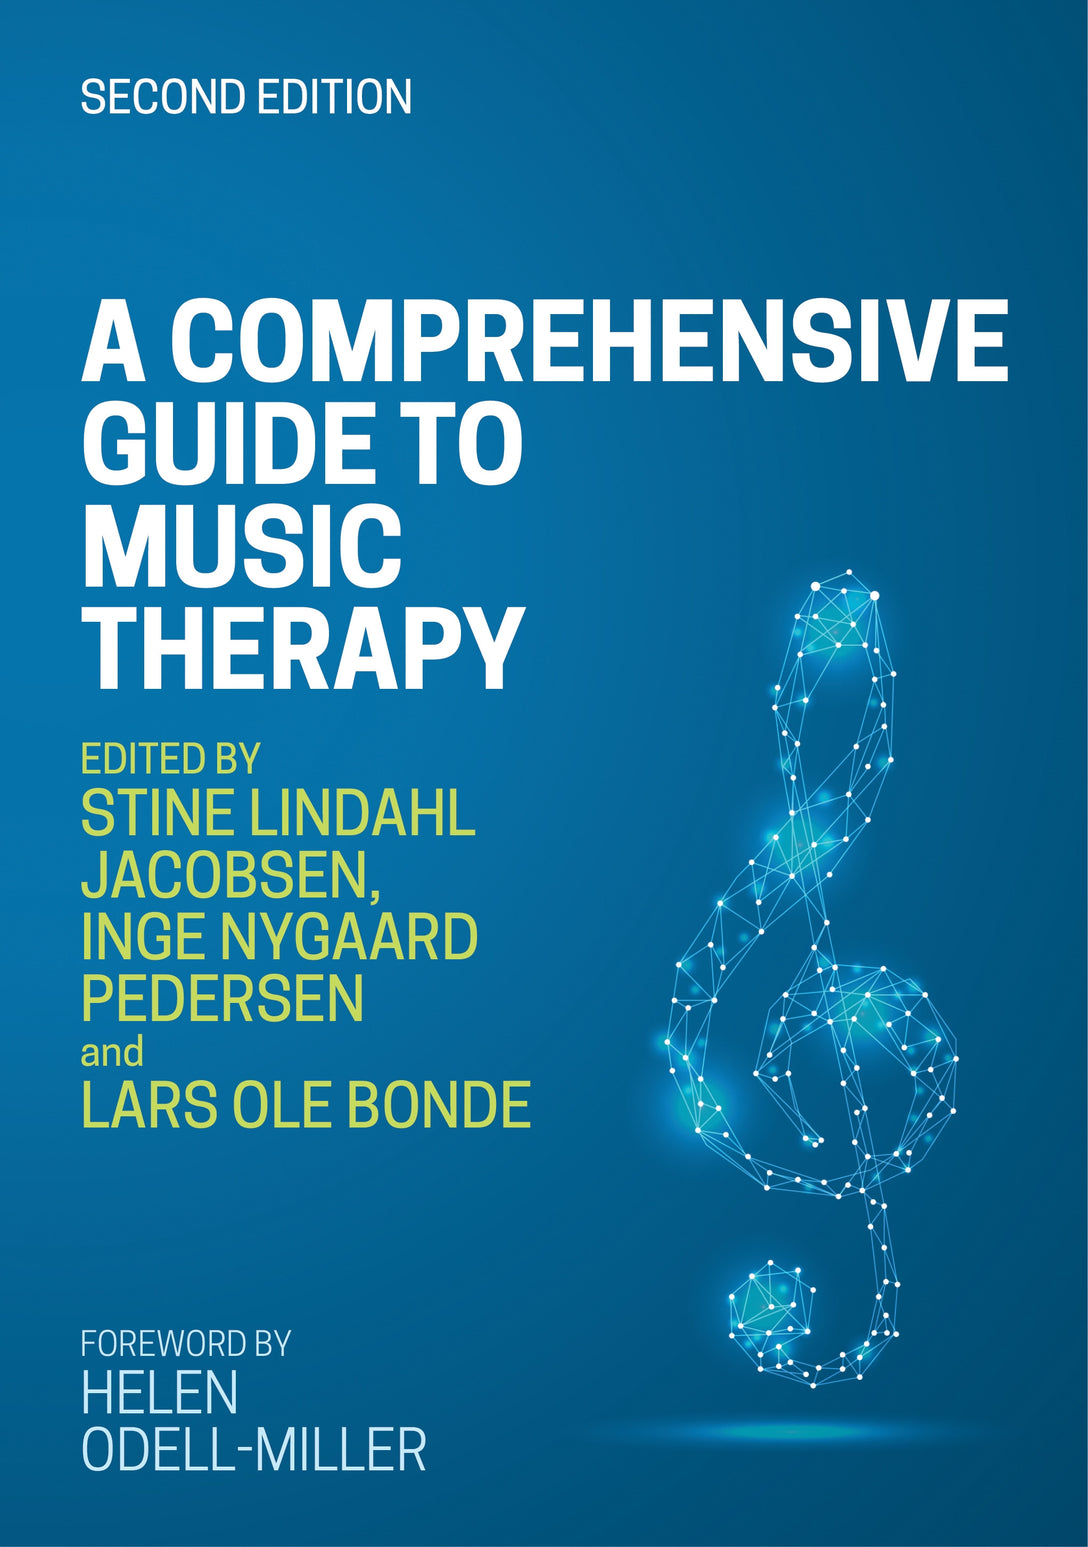 A Comprehensive Guide to Music Therapy, 2nd Edition by Stine Lindahl Jacobsen, Inge Nygaard Pedersen, Lars Ole Bonde, Helen Odell-Miller, No Author Listed